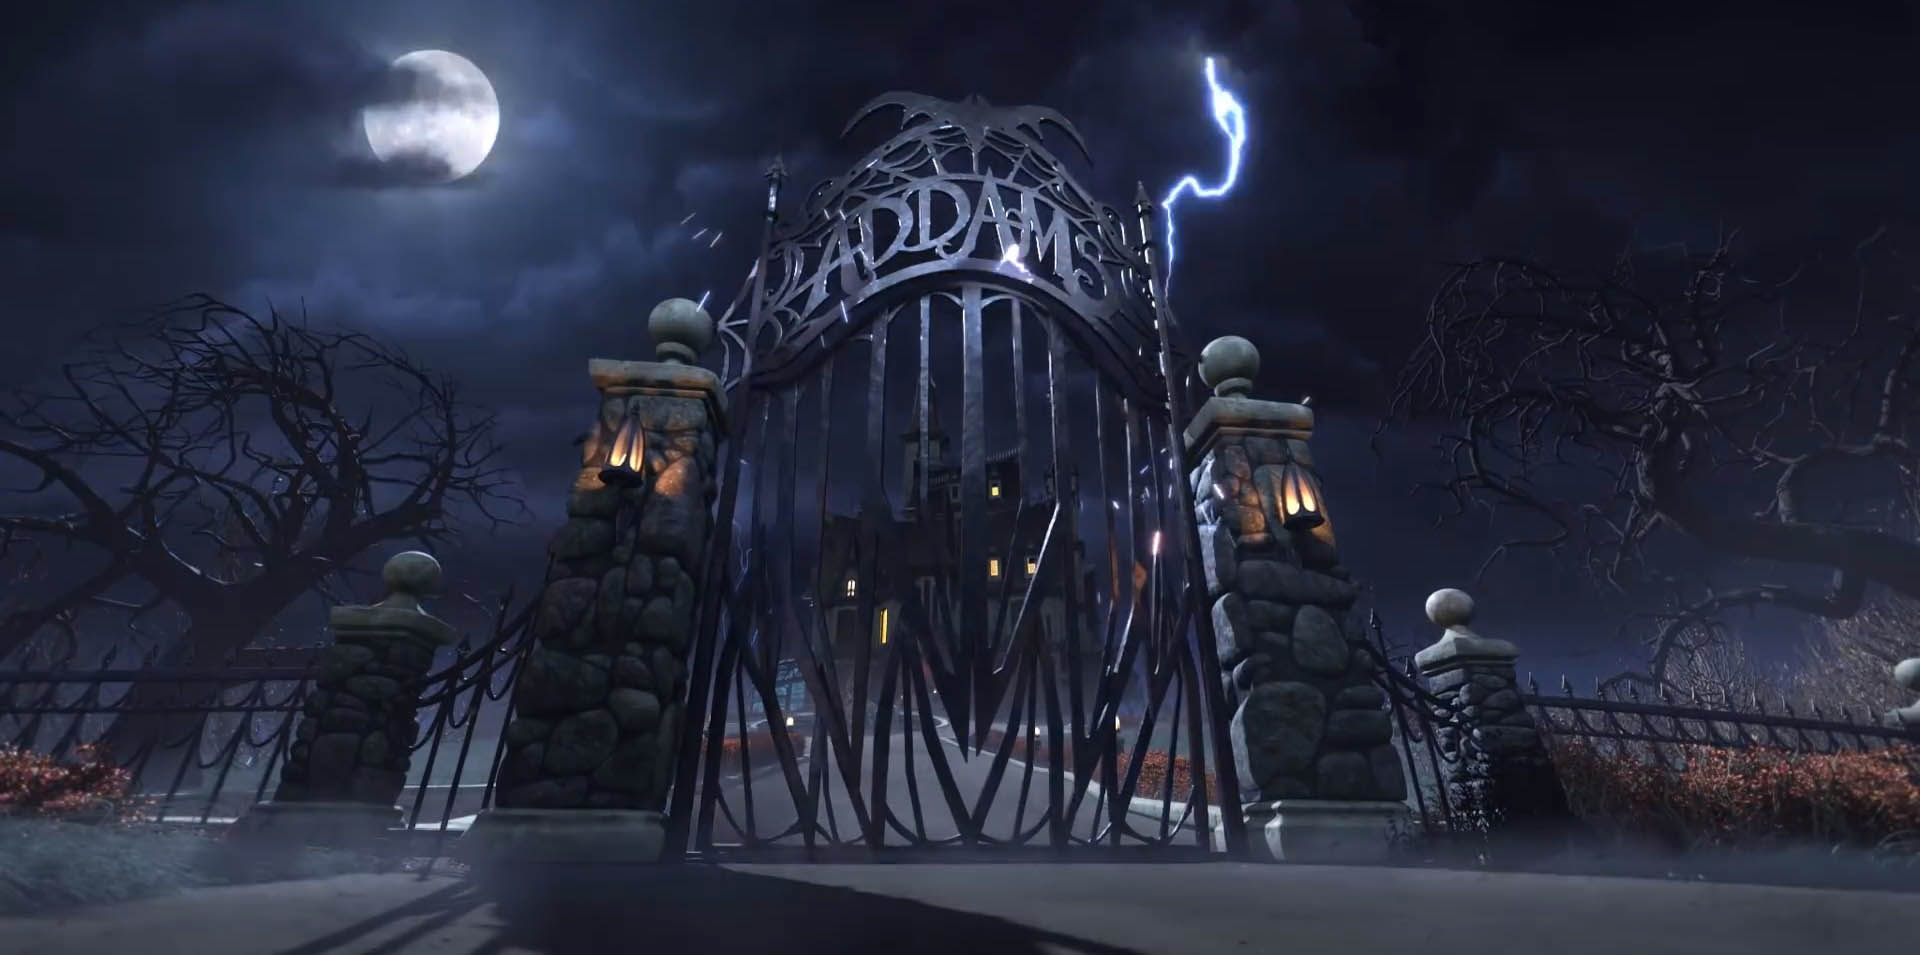 Addams Family trailer - The family gets animated | The Nerdy